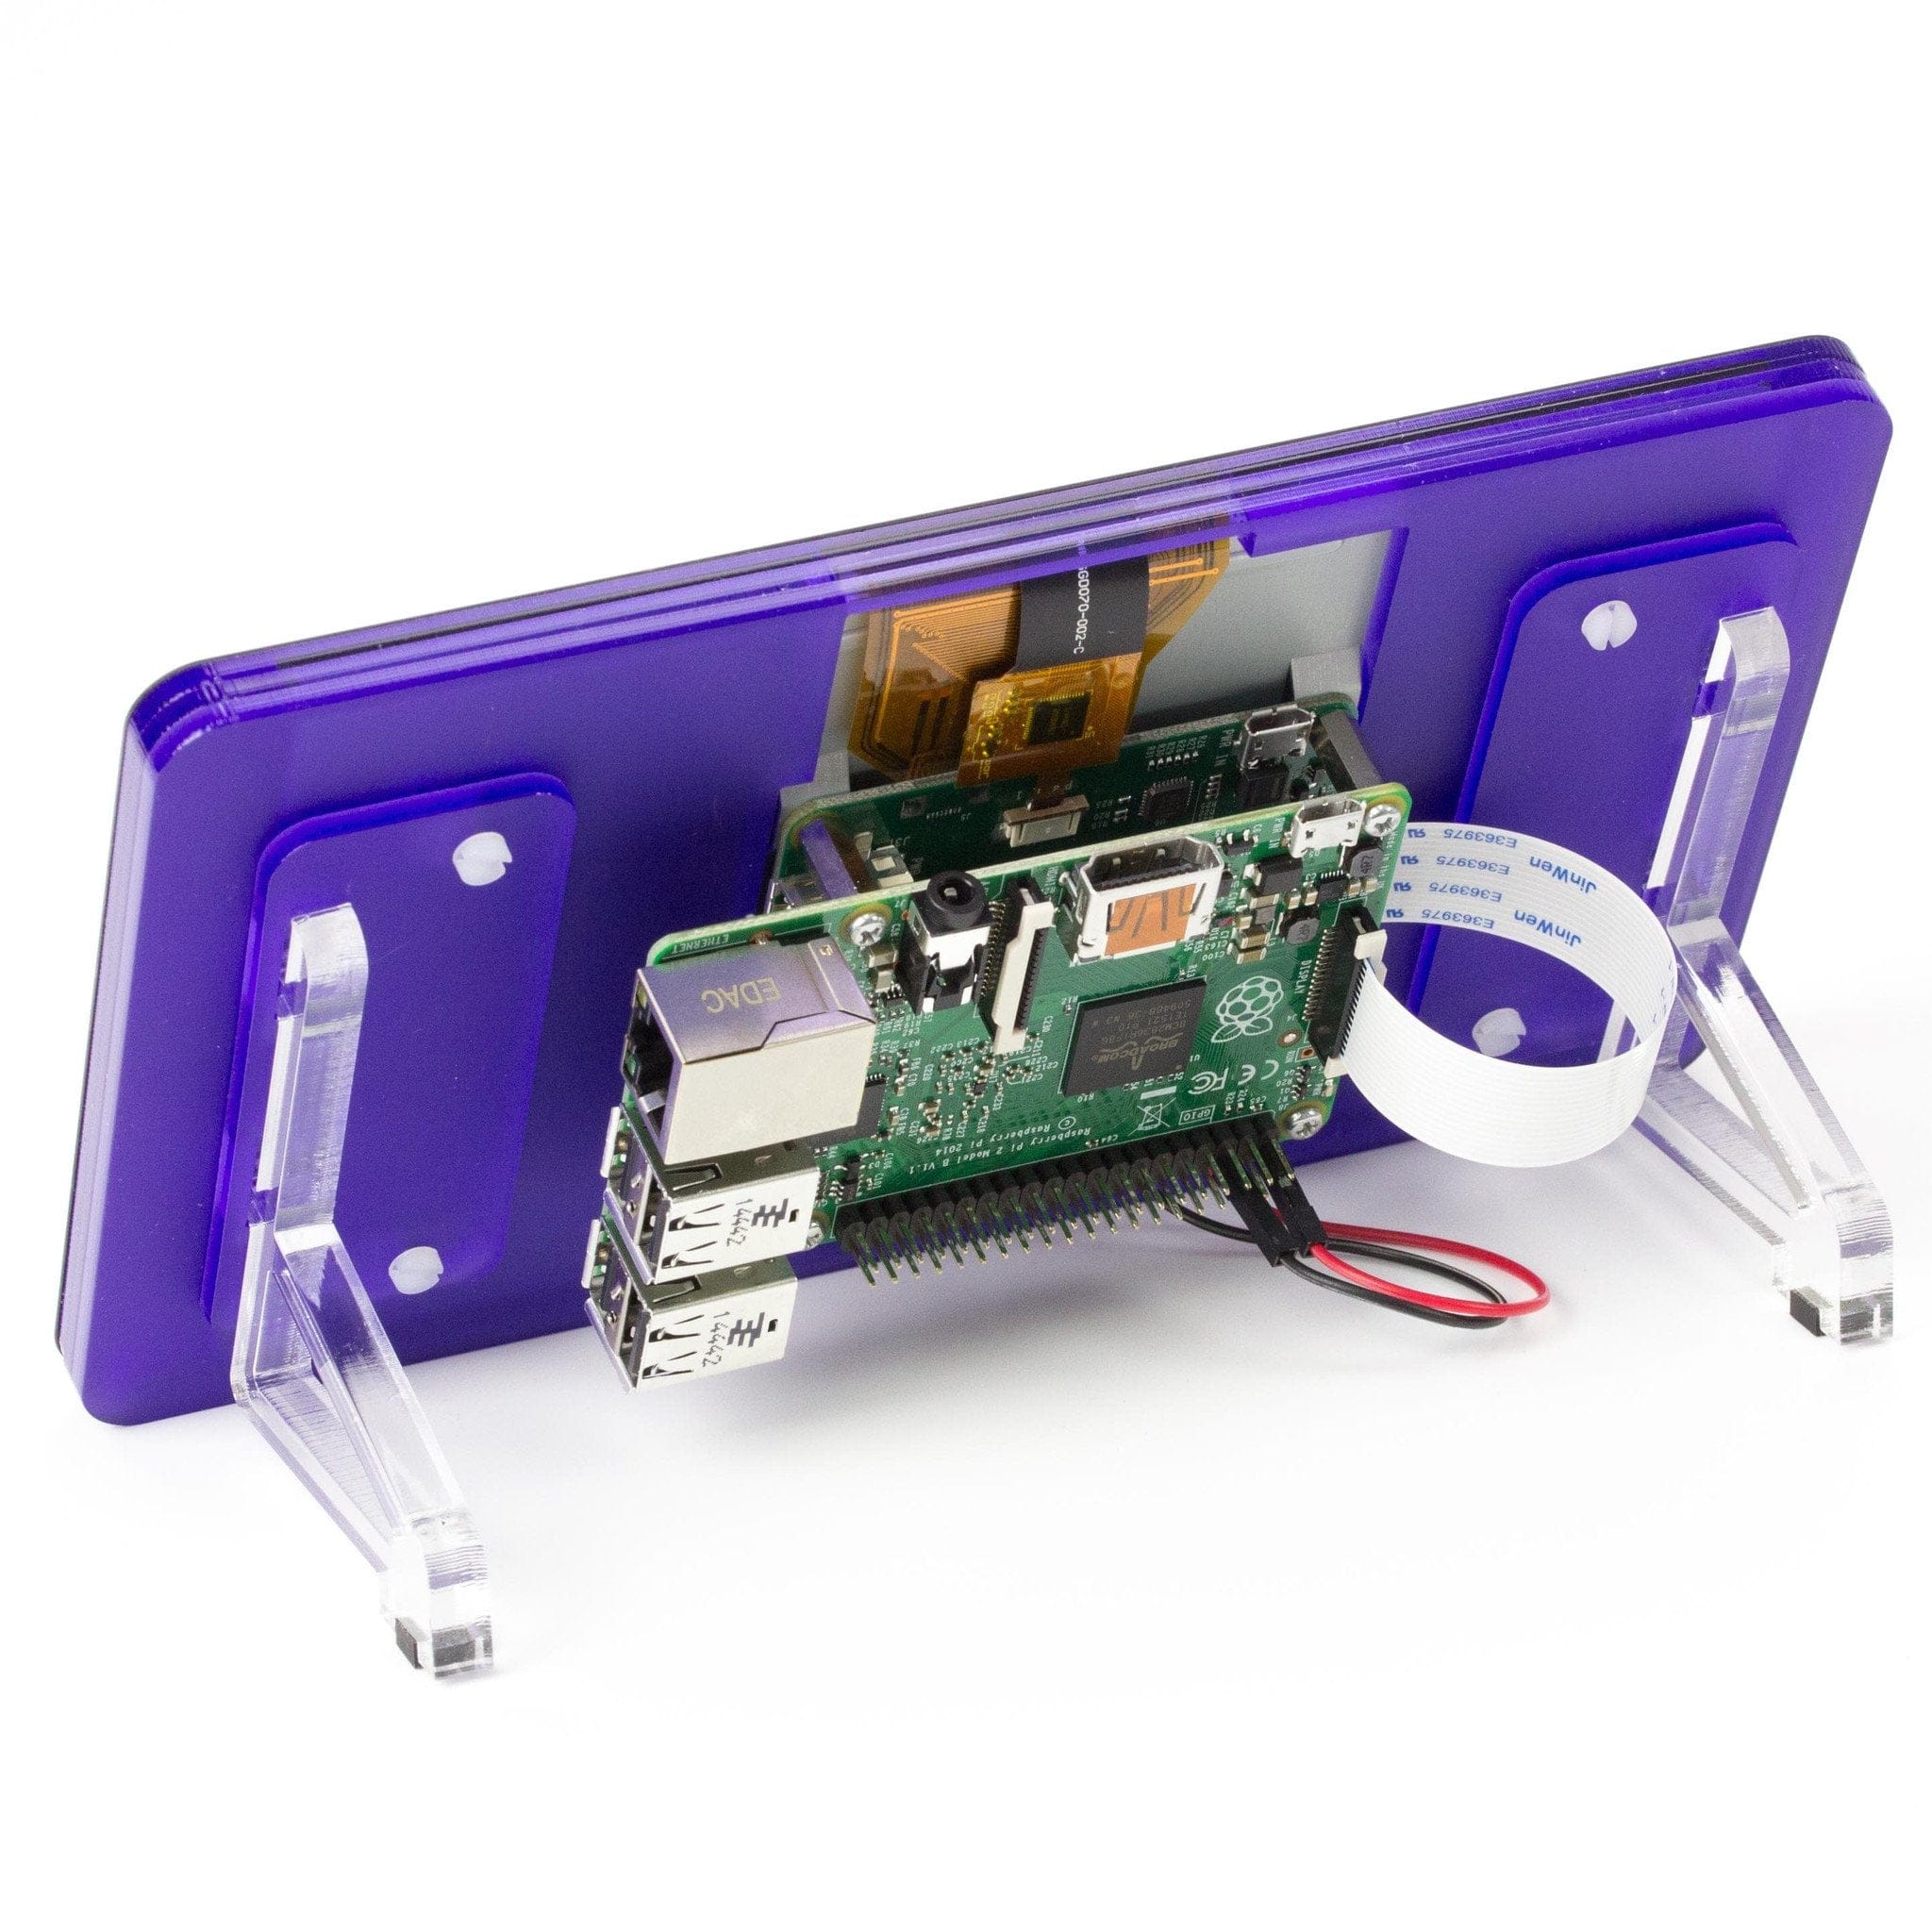 Frame for the Raspberry Pi 7" Touchscreen Display - The Pi Hut